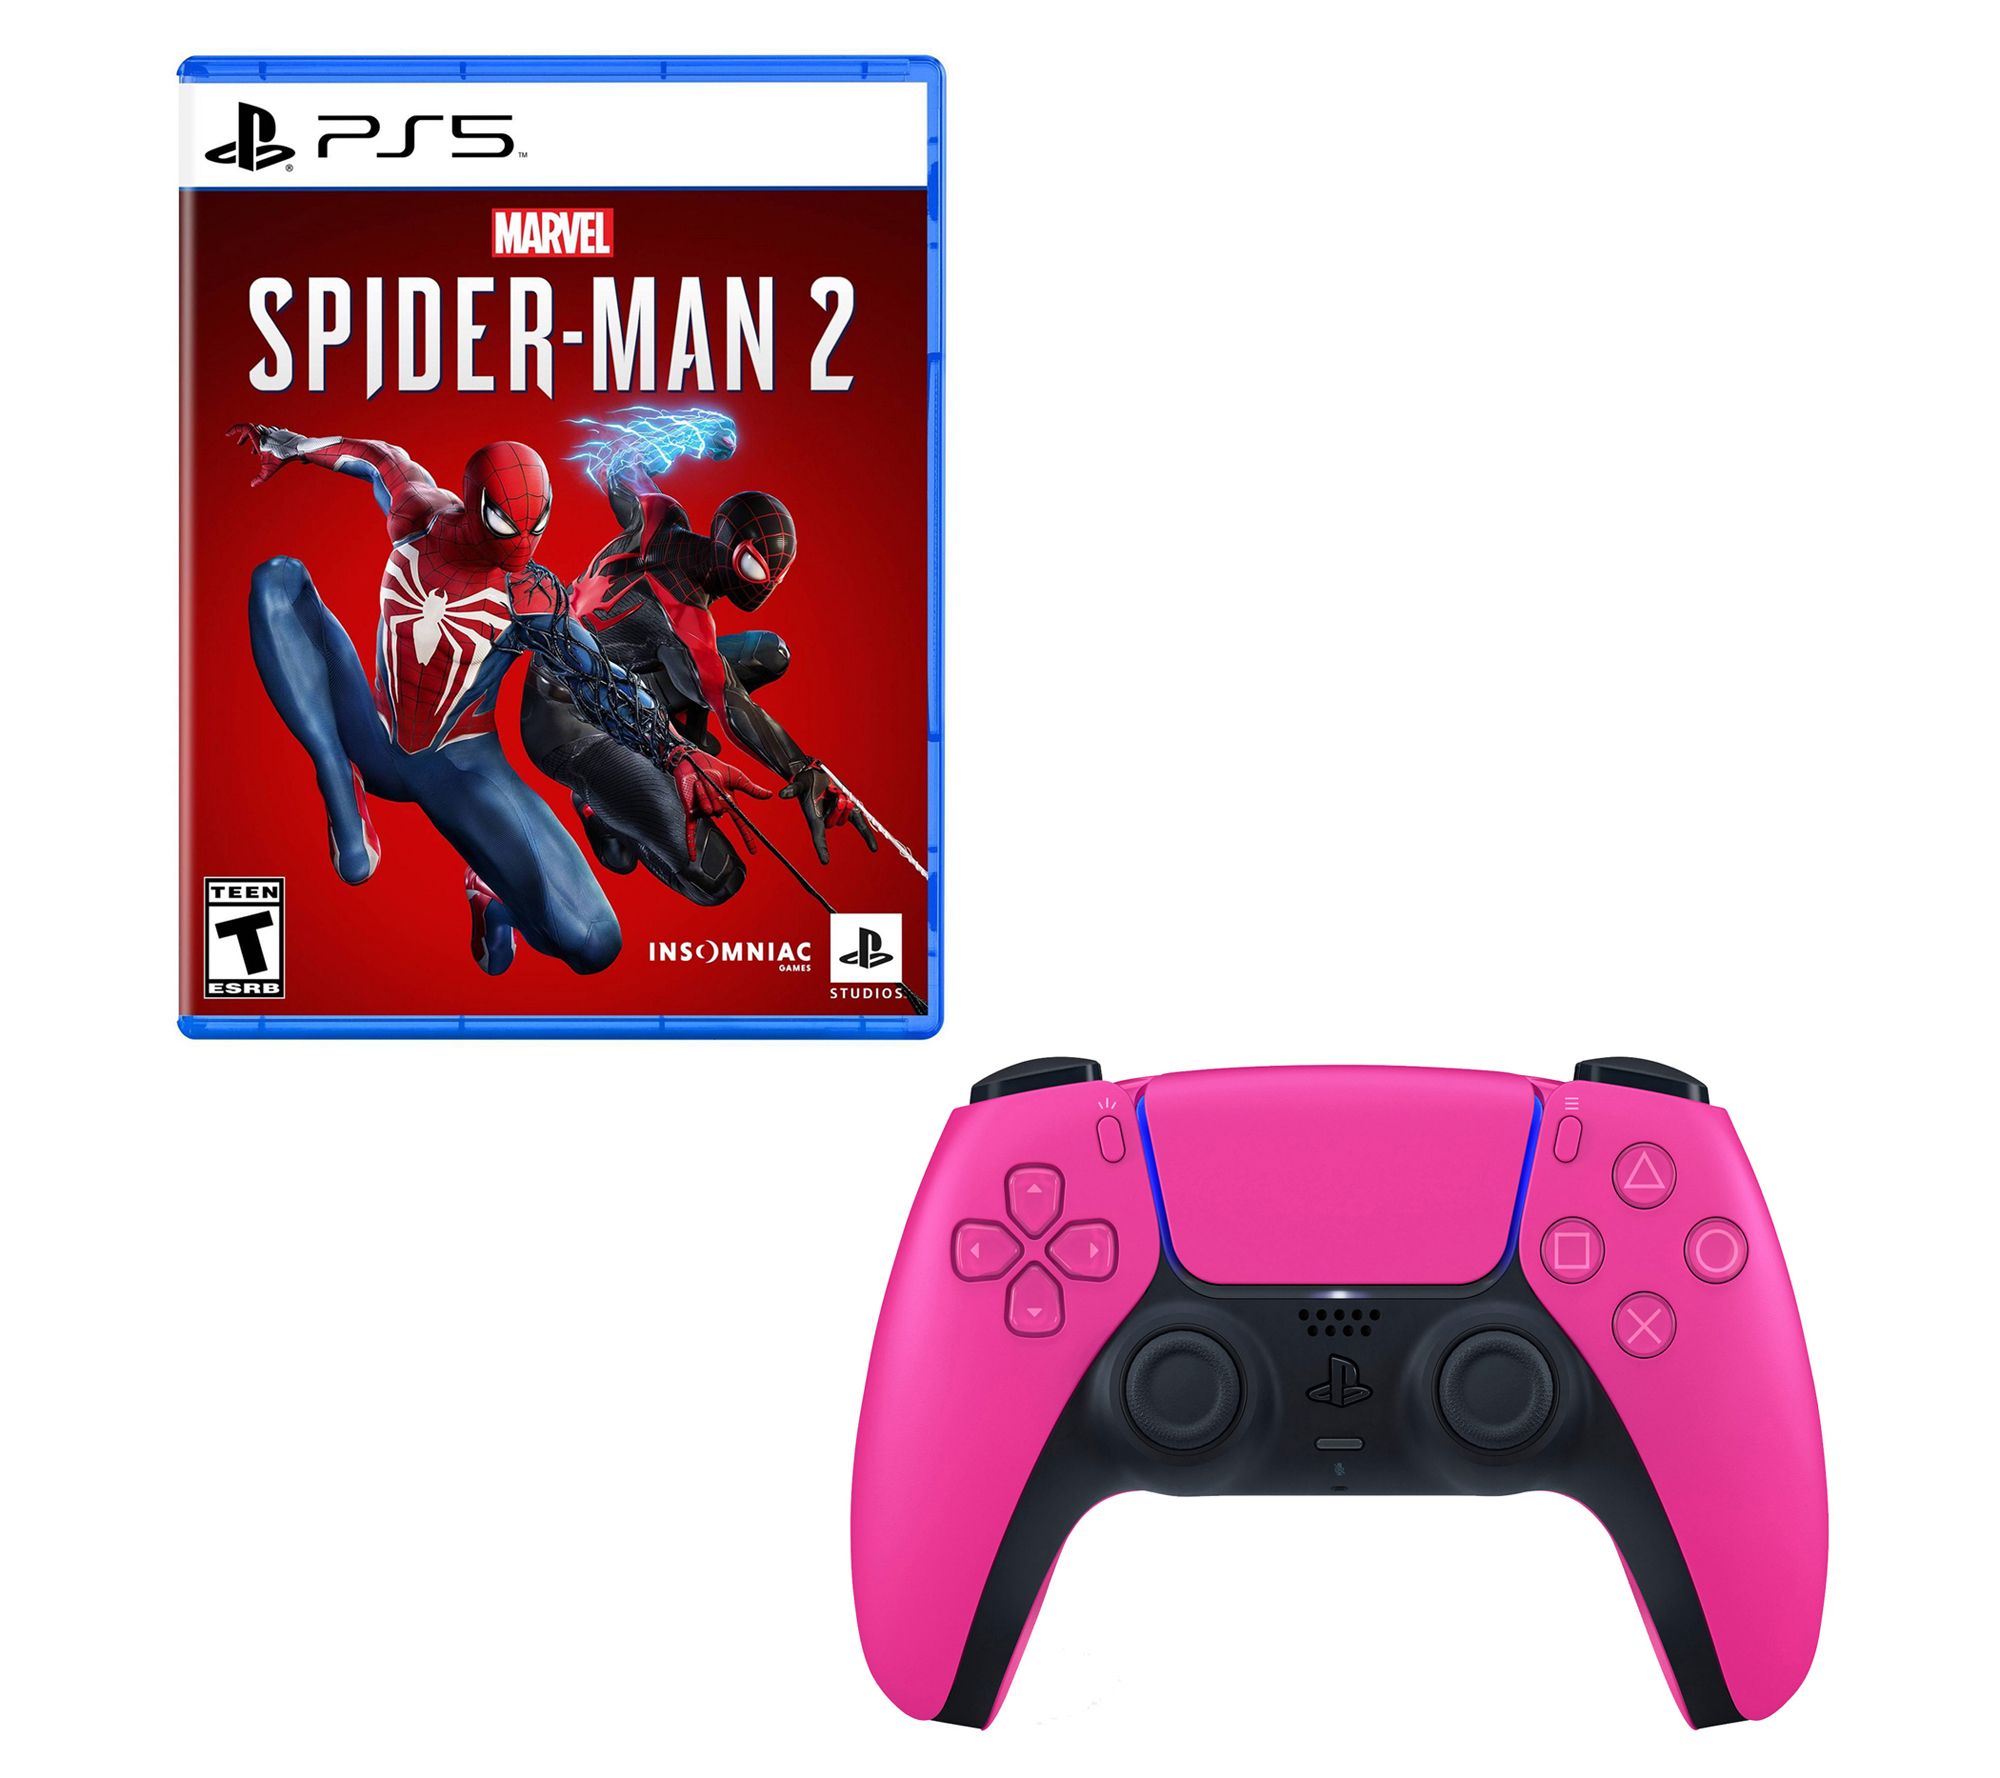 PS5 Spider-Man 2 Game with DualSense Controller - QVC.com